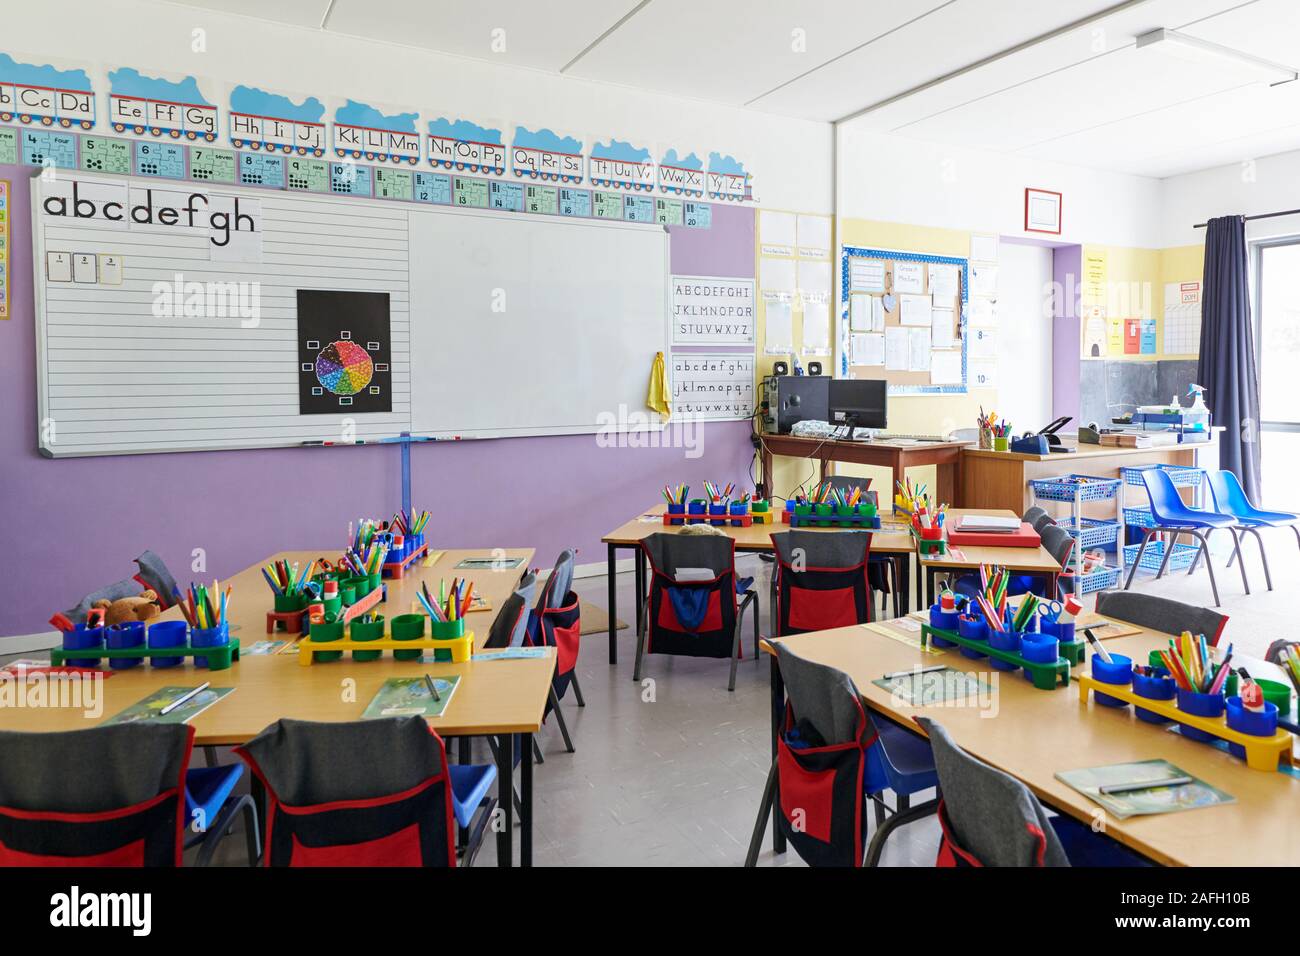 Empty Classroom In Elementary School With Whiteboard And Desks Stock Photo